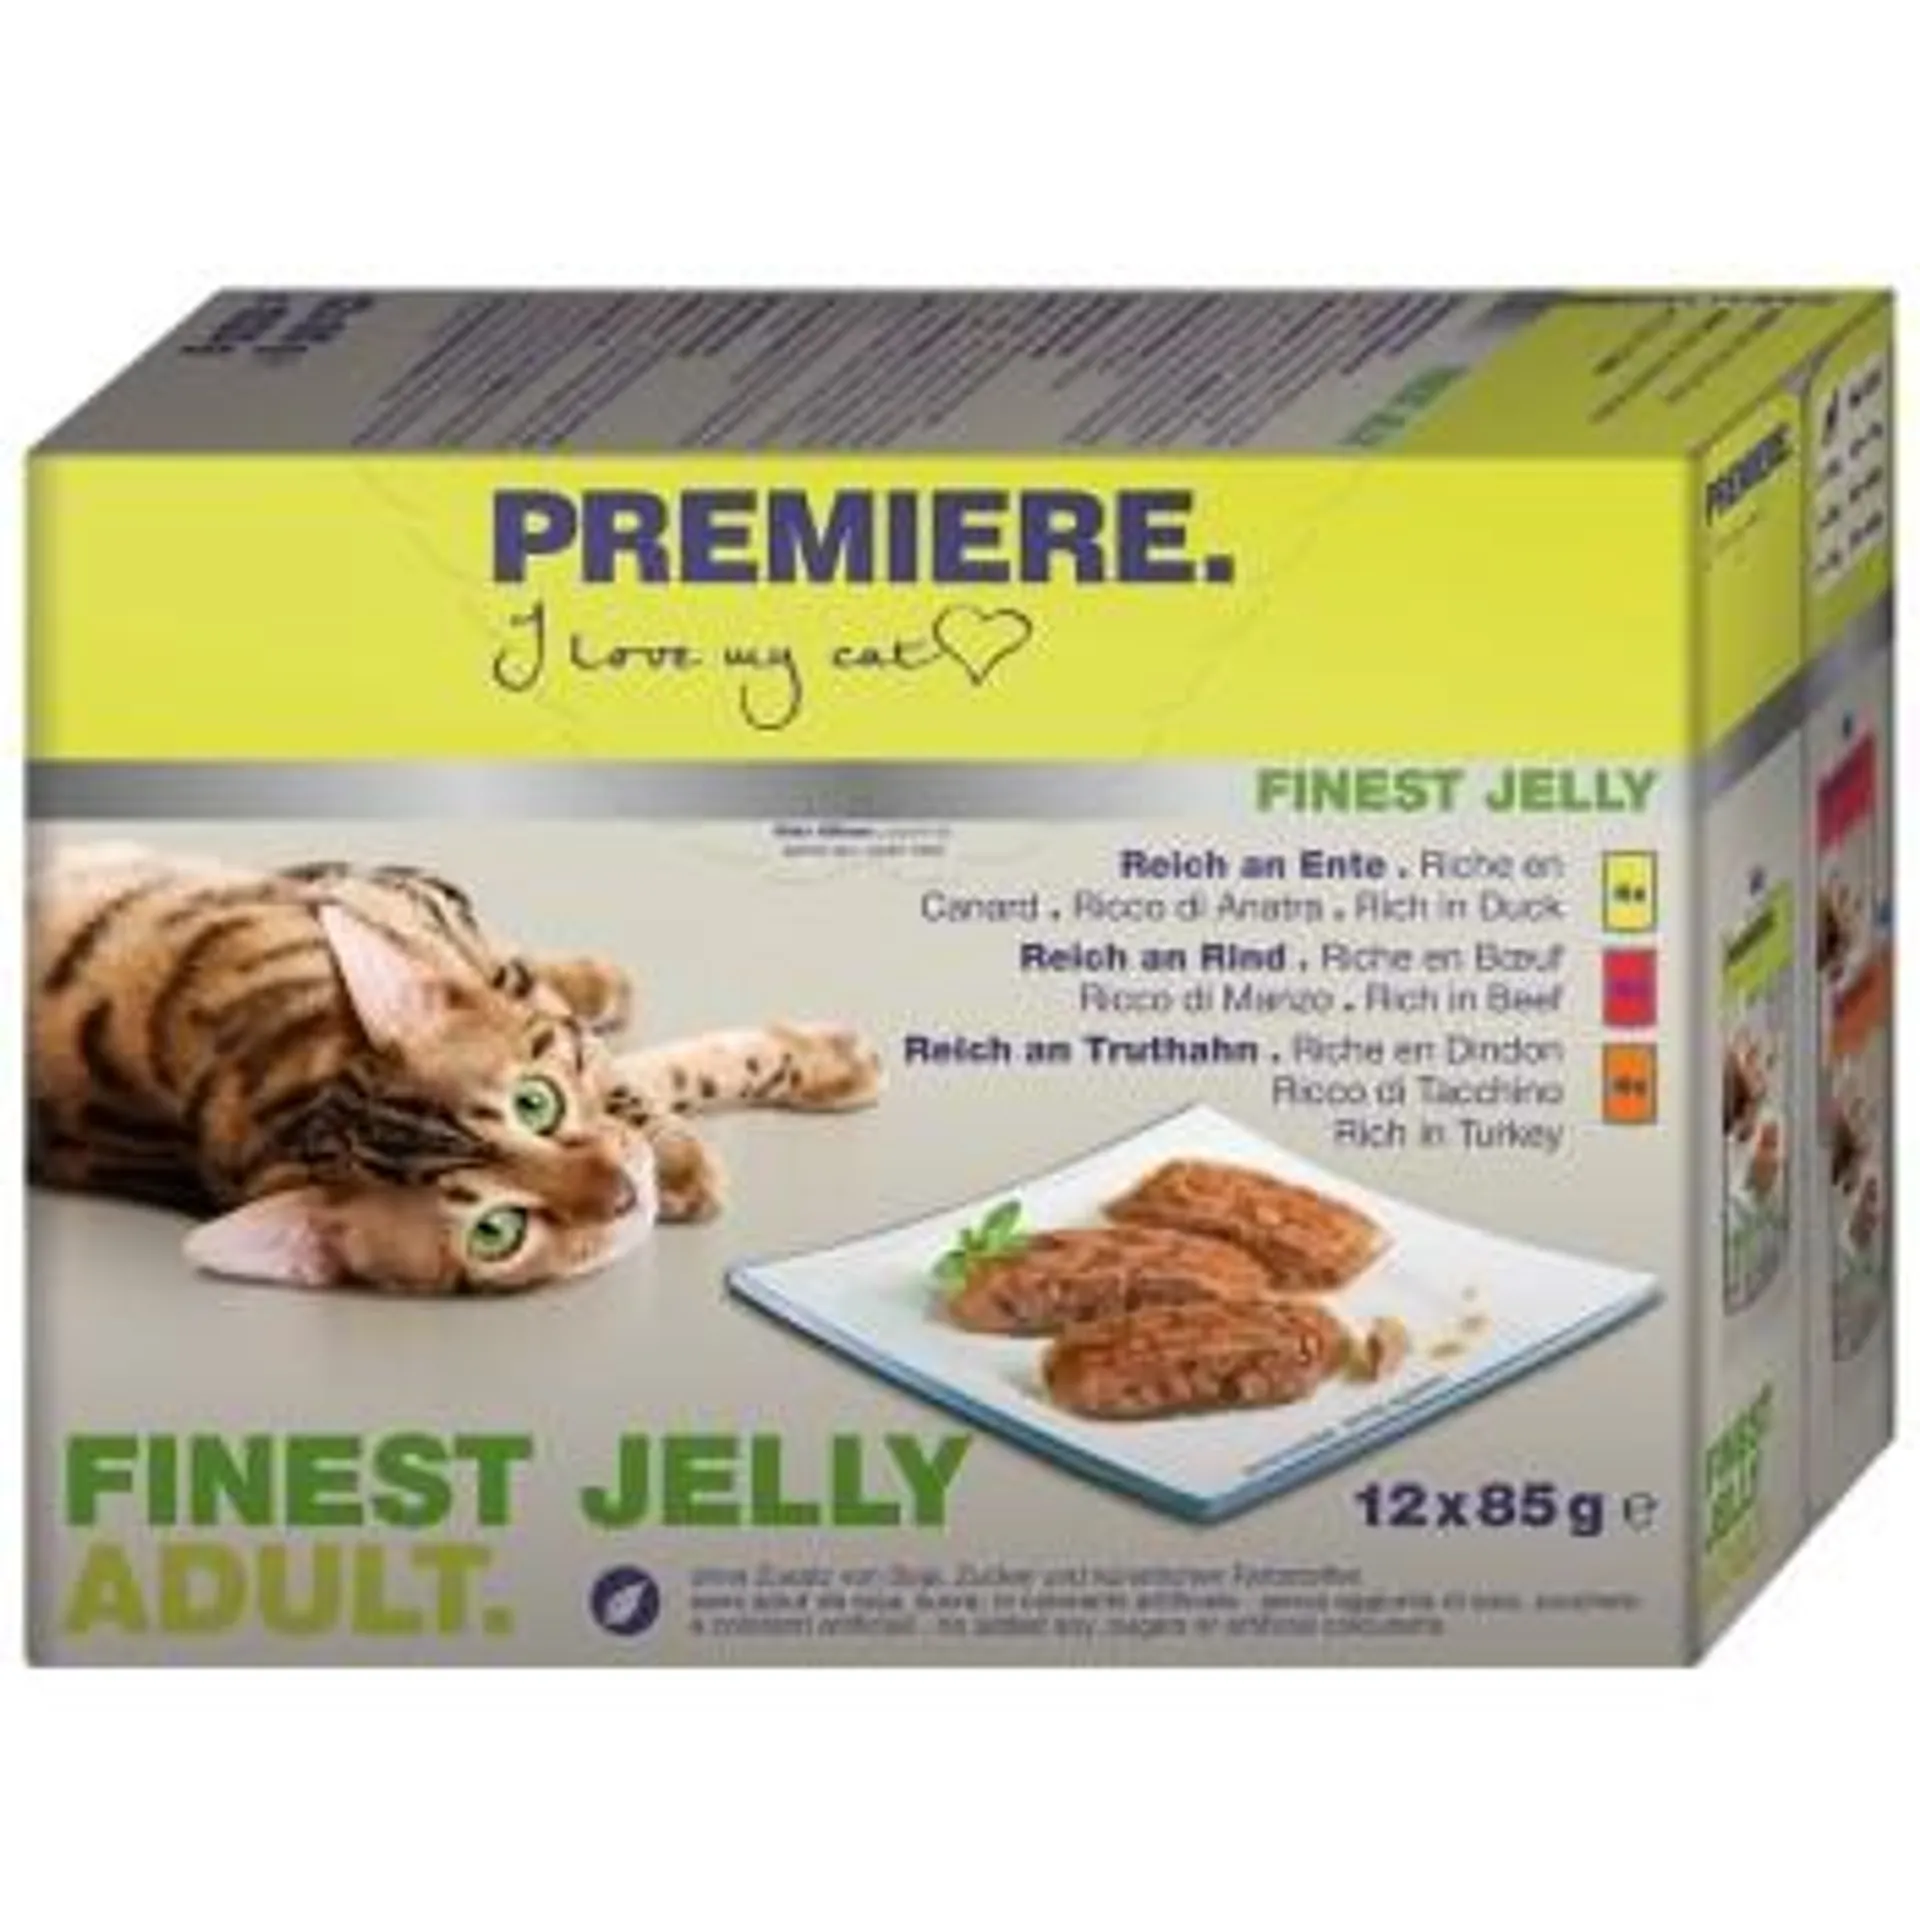 PREMIERE Finest Jelly Adult Multipack 12x85g